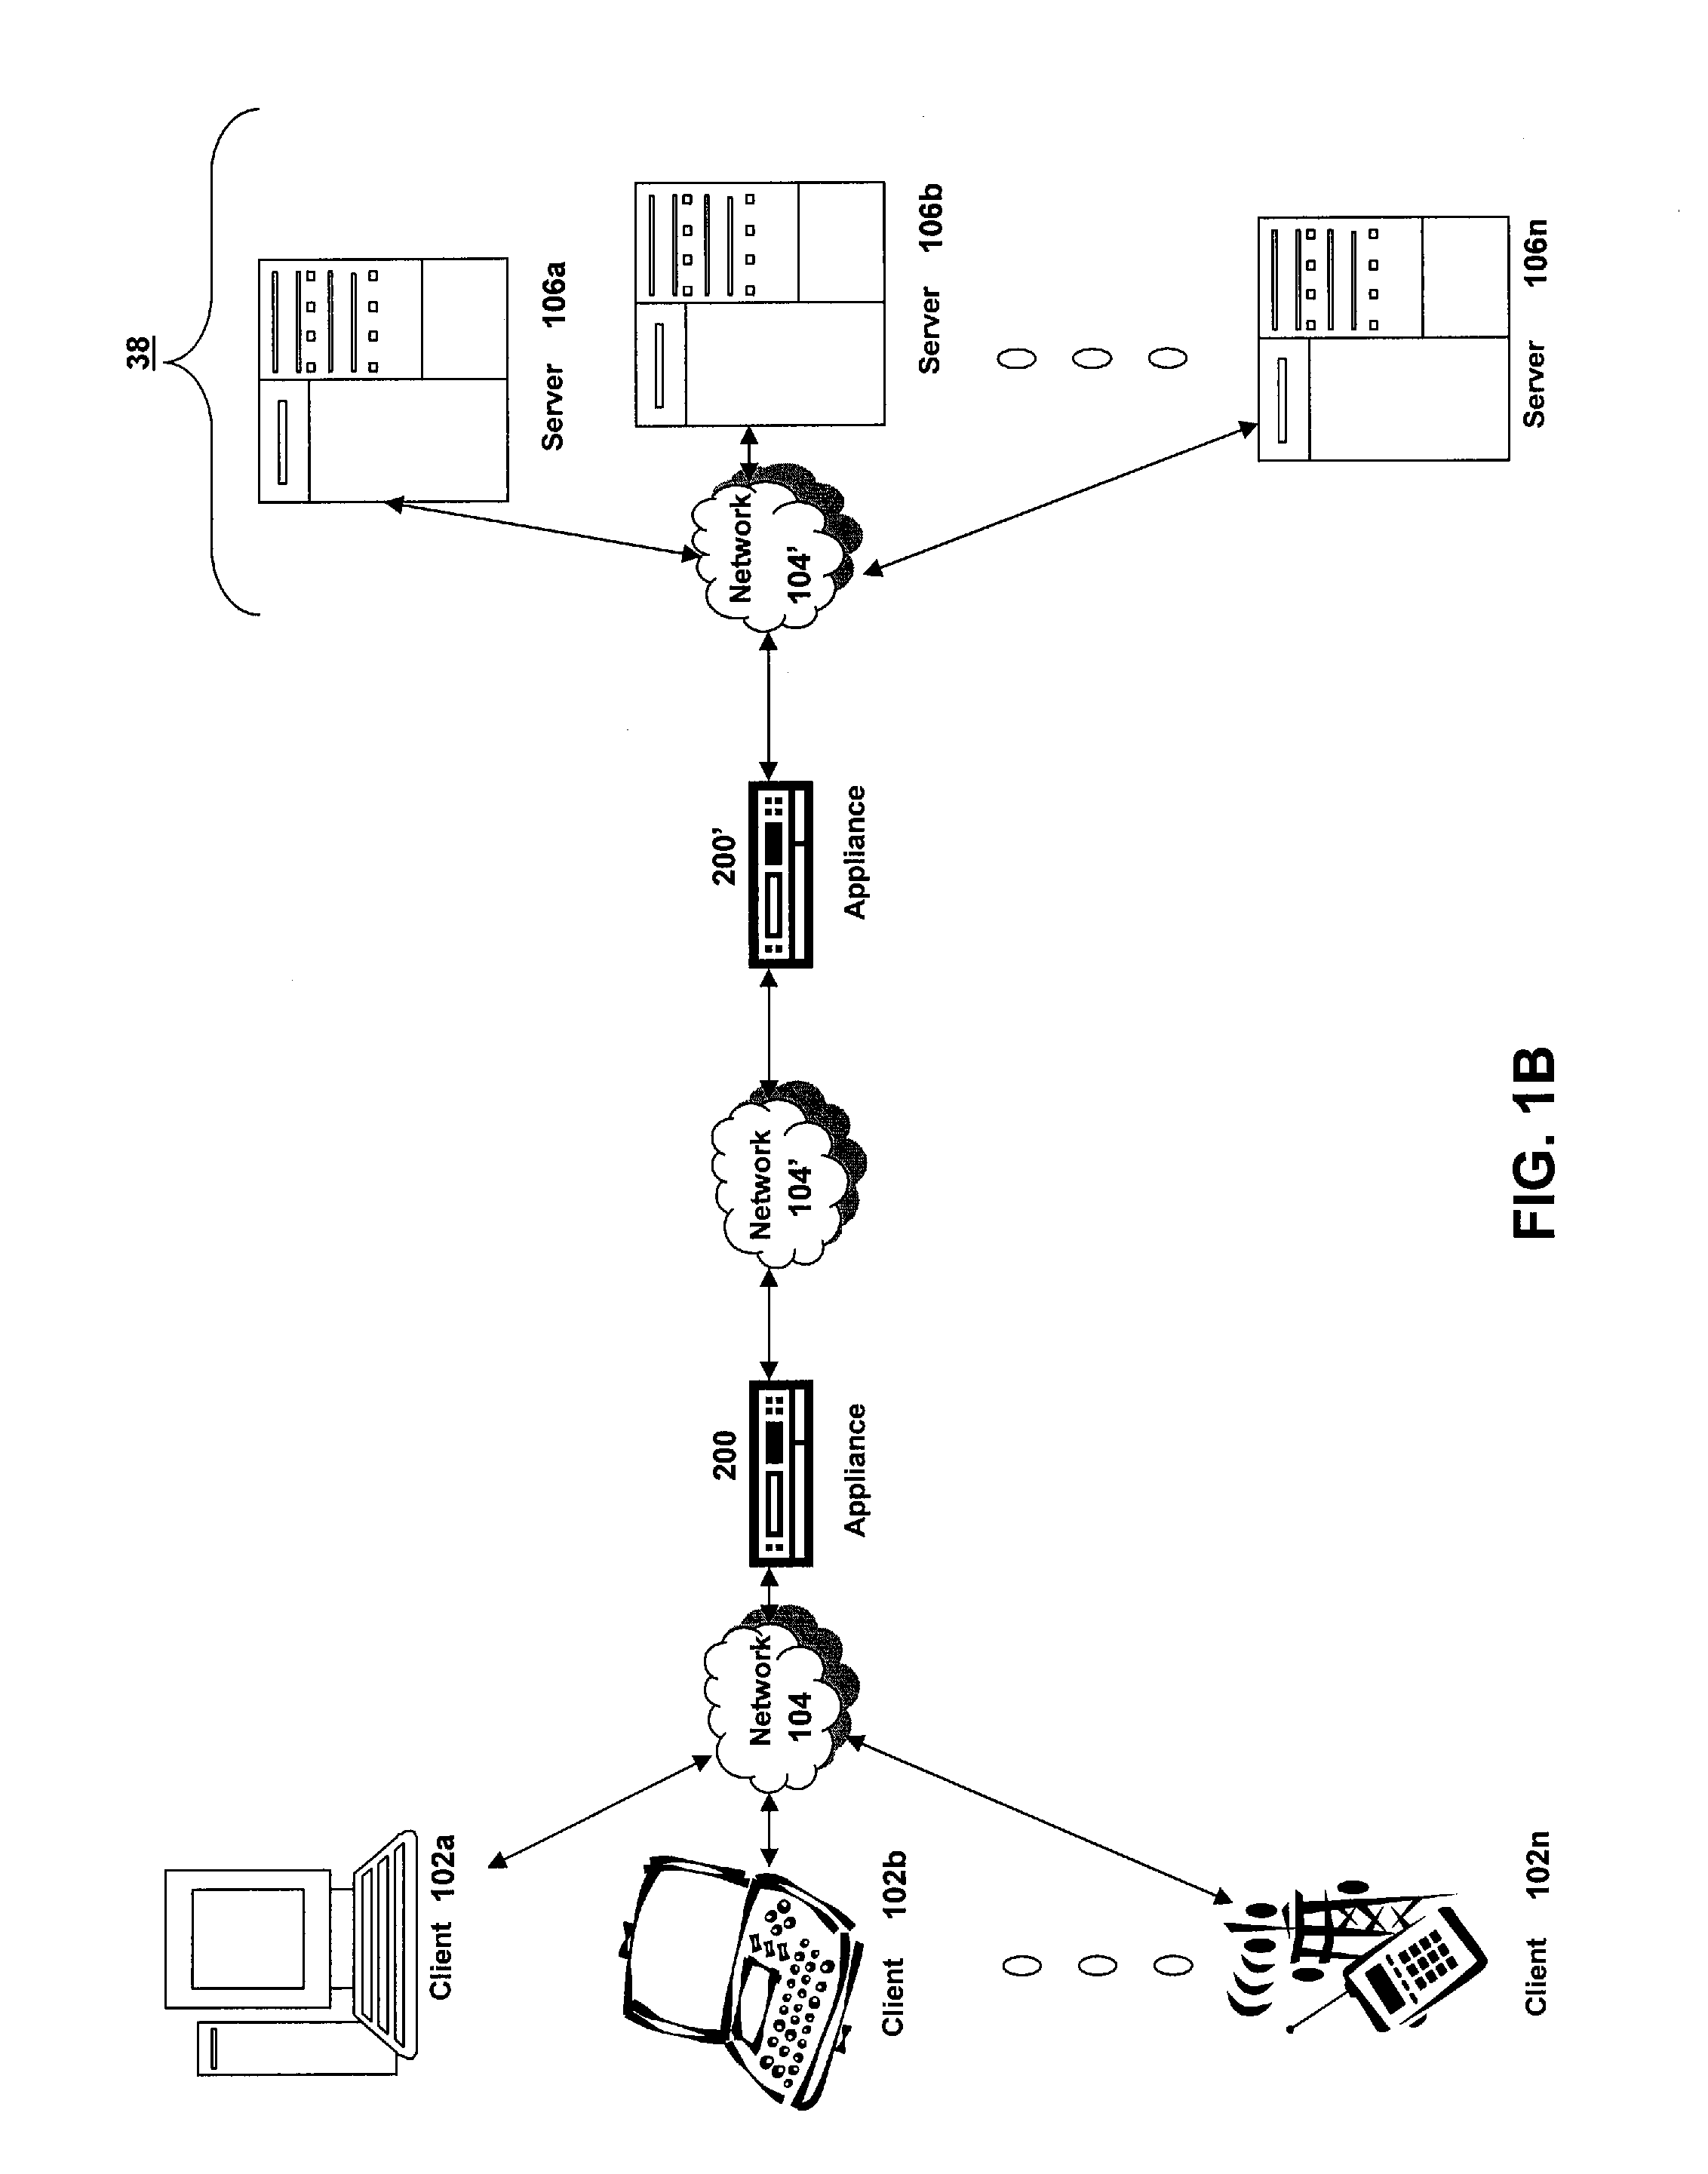 Systems and methods for monitoring components of a remote access server farm